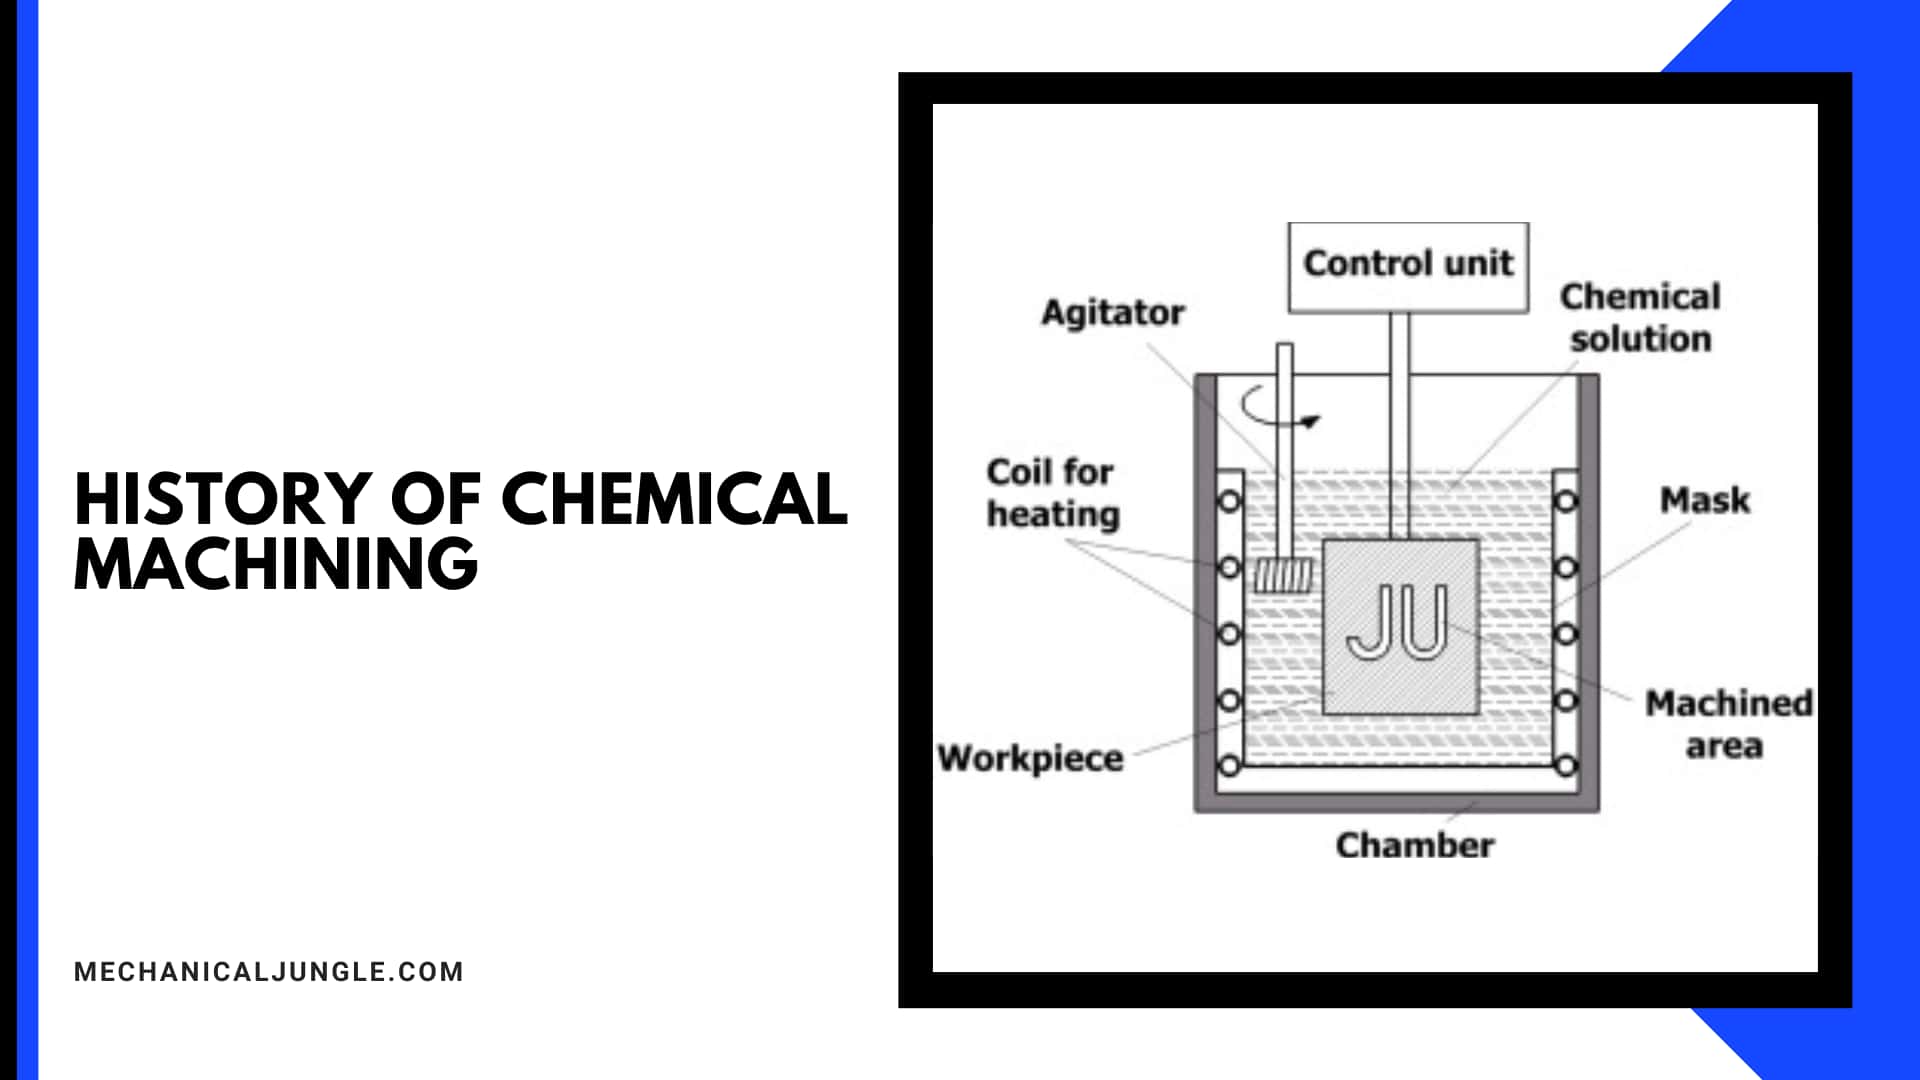 History of Chemical Machining